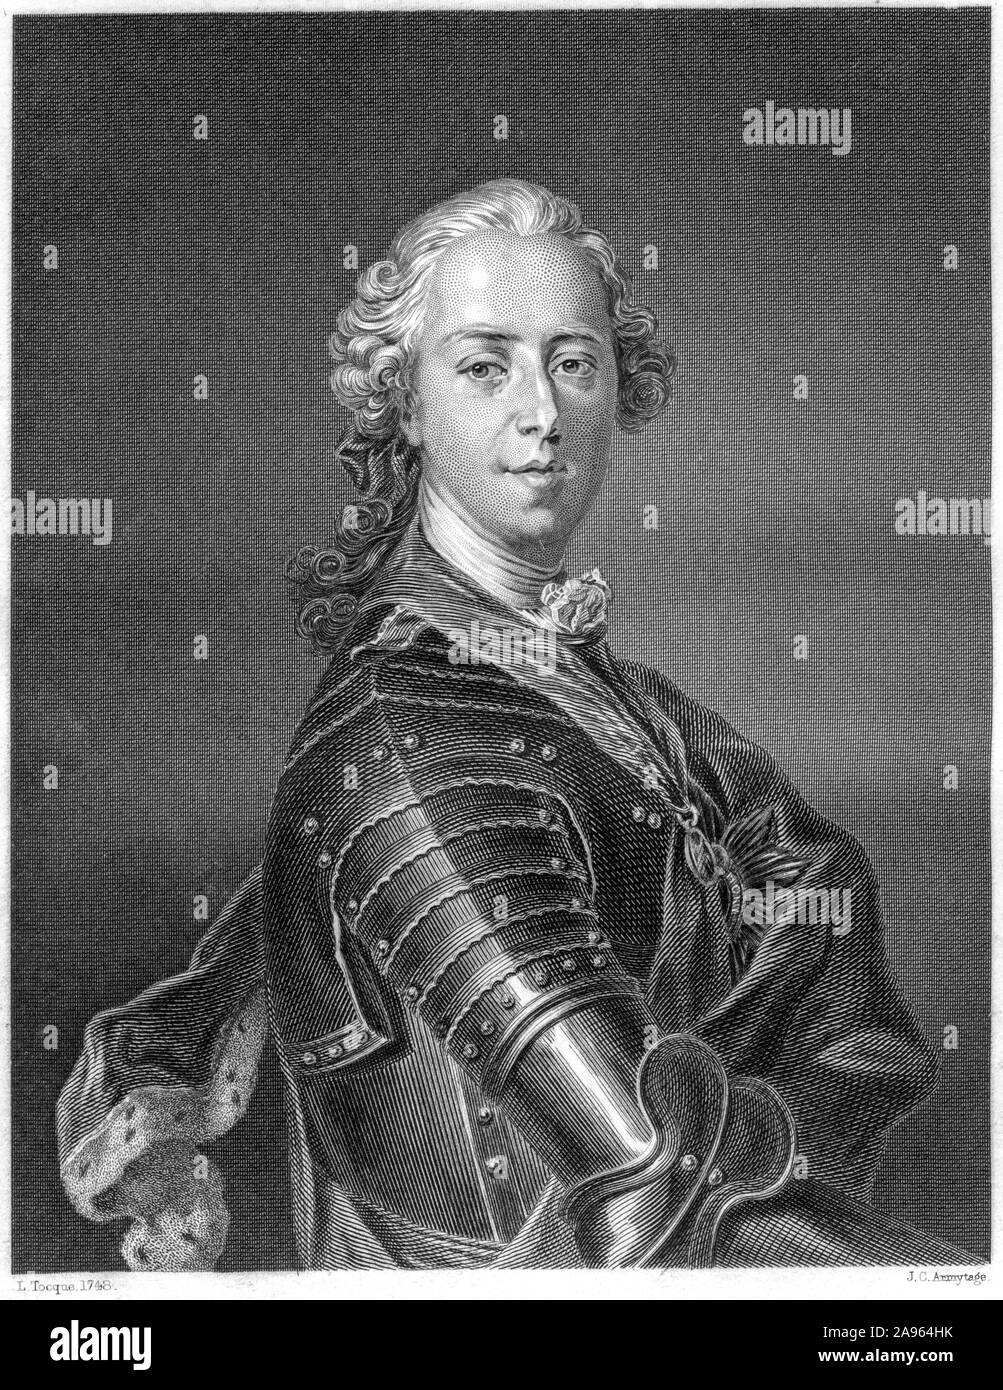 An engraving of Prince Charles Edward Stuart (Bonnie Prince Charlie) scanned at high resolution from a book printed in 1859.   Believed copyright free Stock Photo